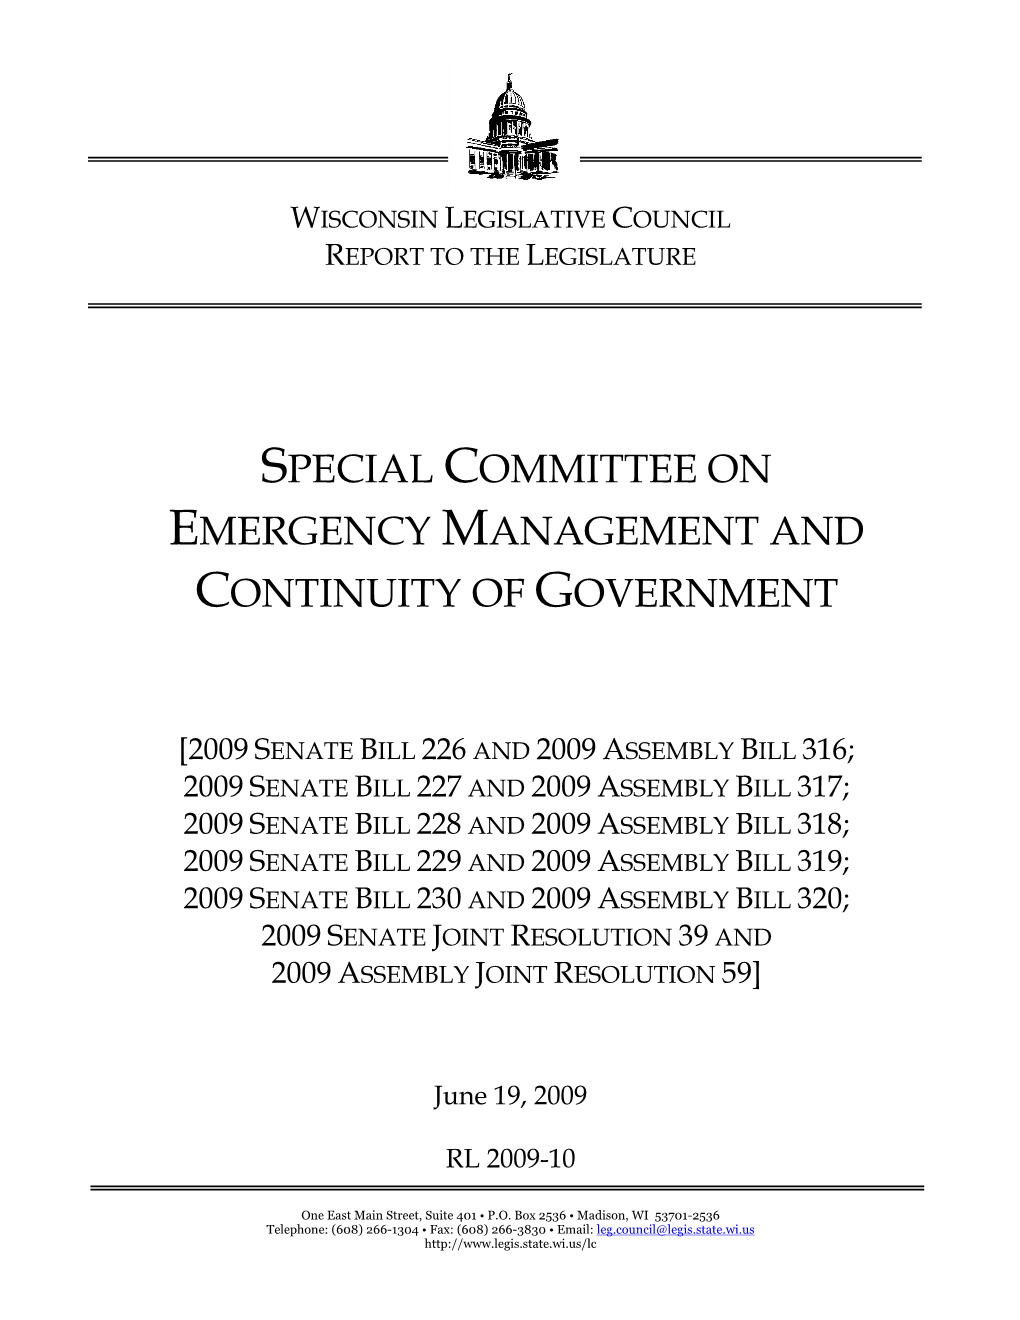 Special Committee on Emergency Management and Continuity of Government